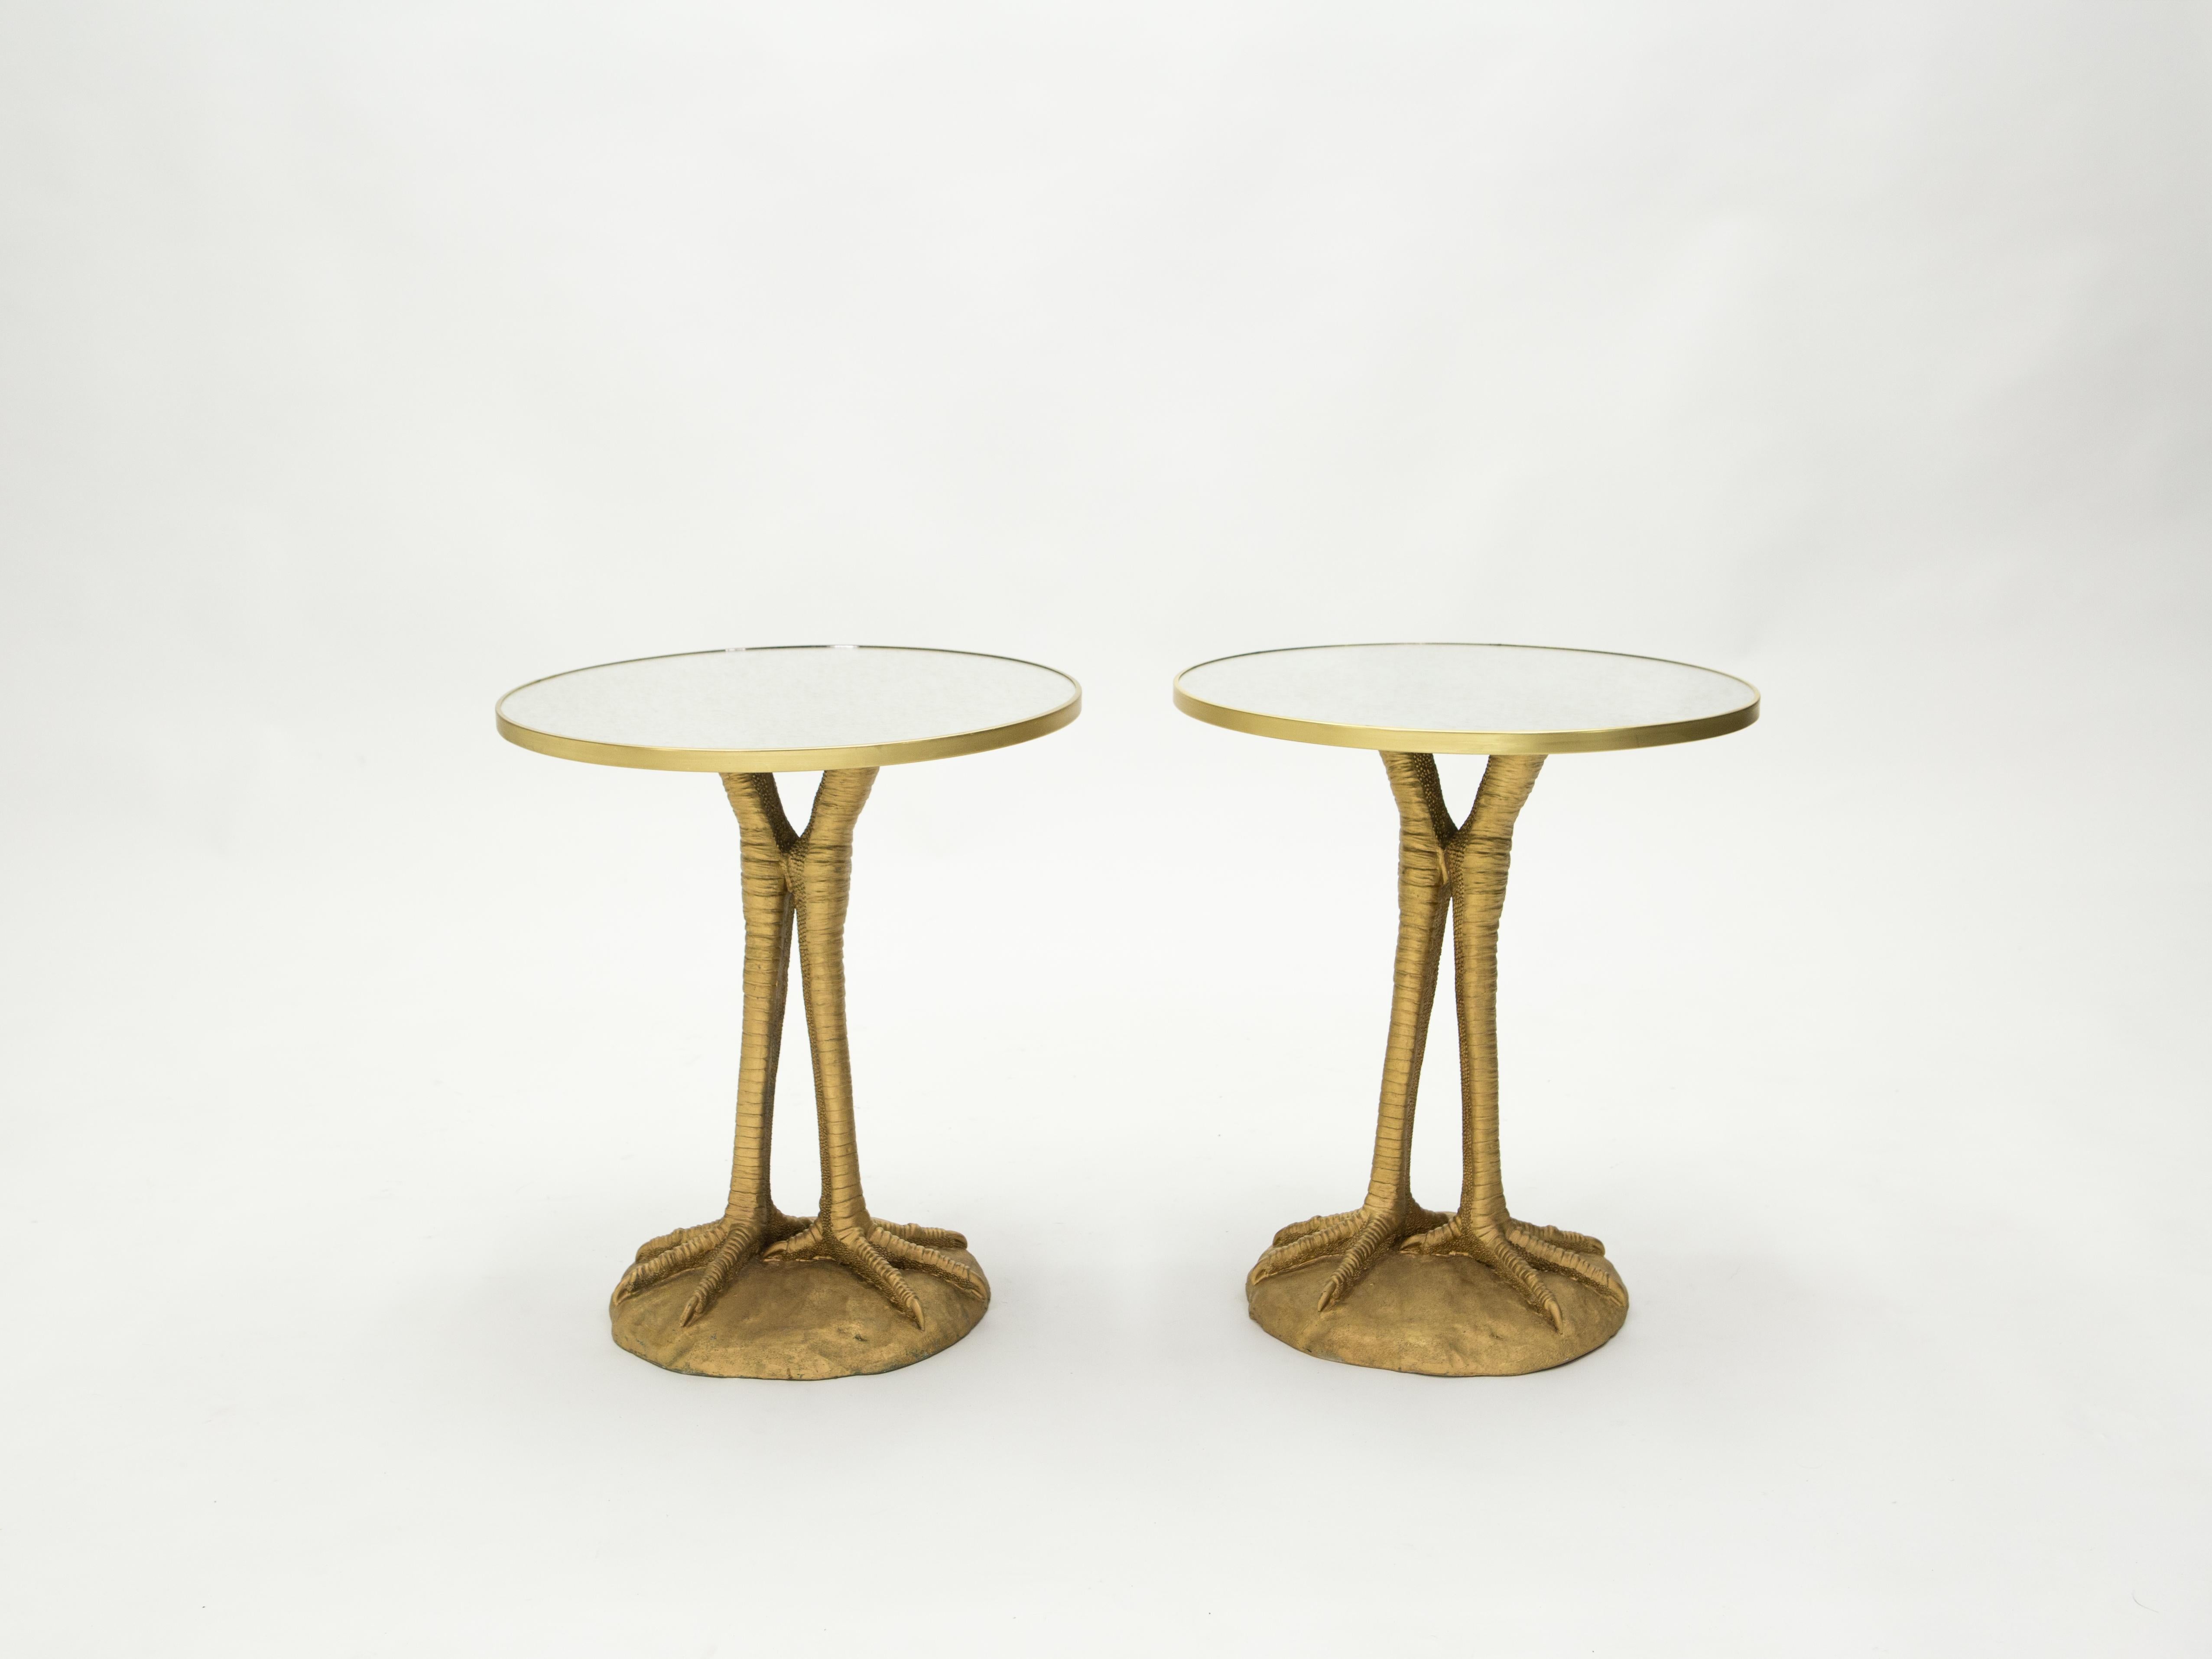 This pair of gueridon tables from the 1970’s is a beautiful example of French design firm Maison Romeo Paris. With its decorative resin ostrich leg feet look, it feels inspired by Duval-Brasseur design, using the zoomorphic design approach. The